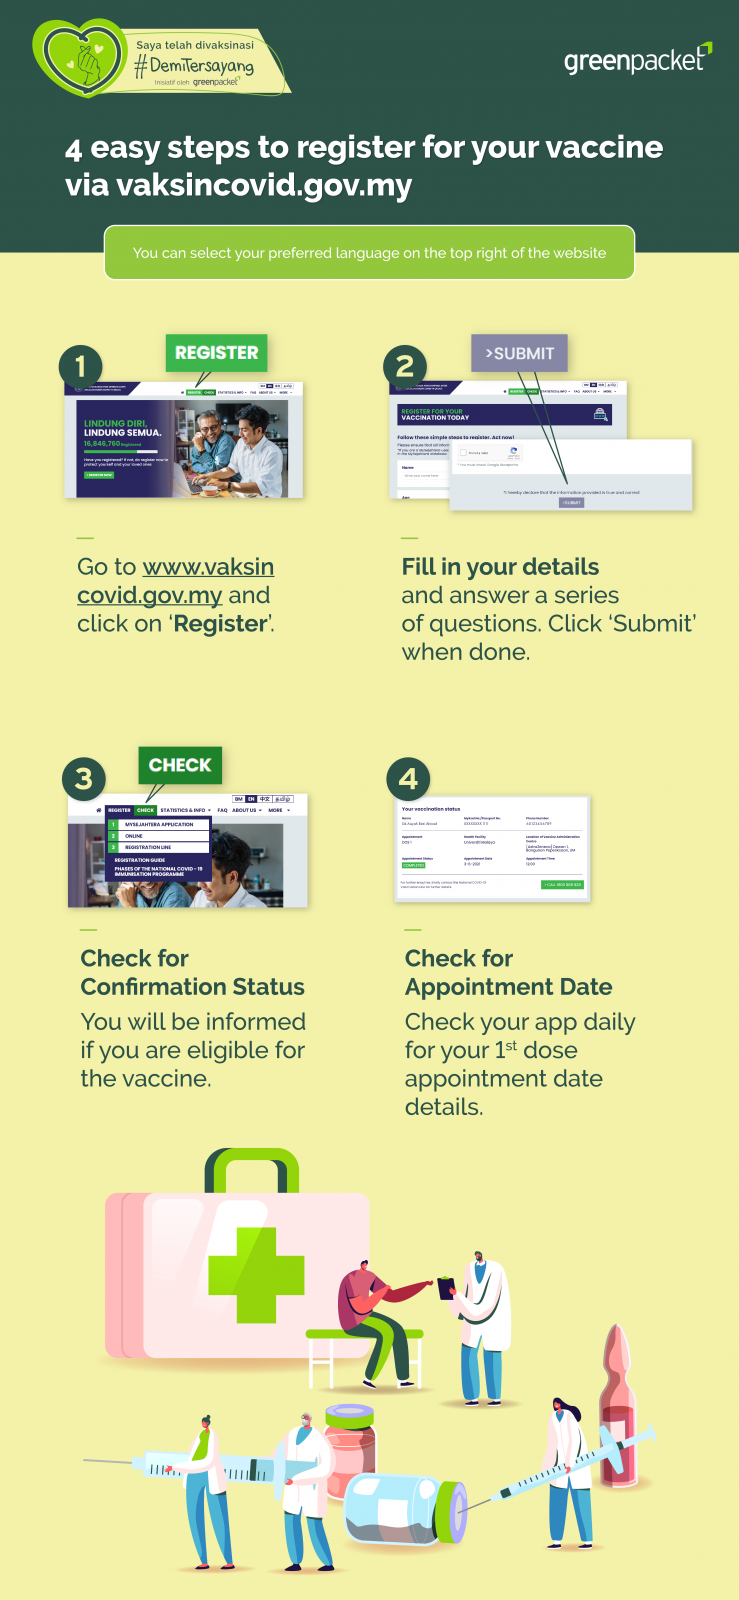 GreenPacket 2 A Step by Step on How to Register for Your Vaccine on www.vaksincovid.gov .my